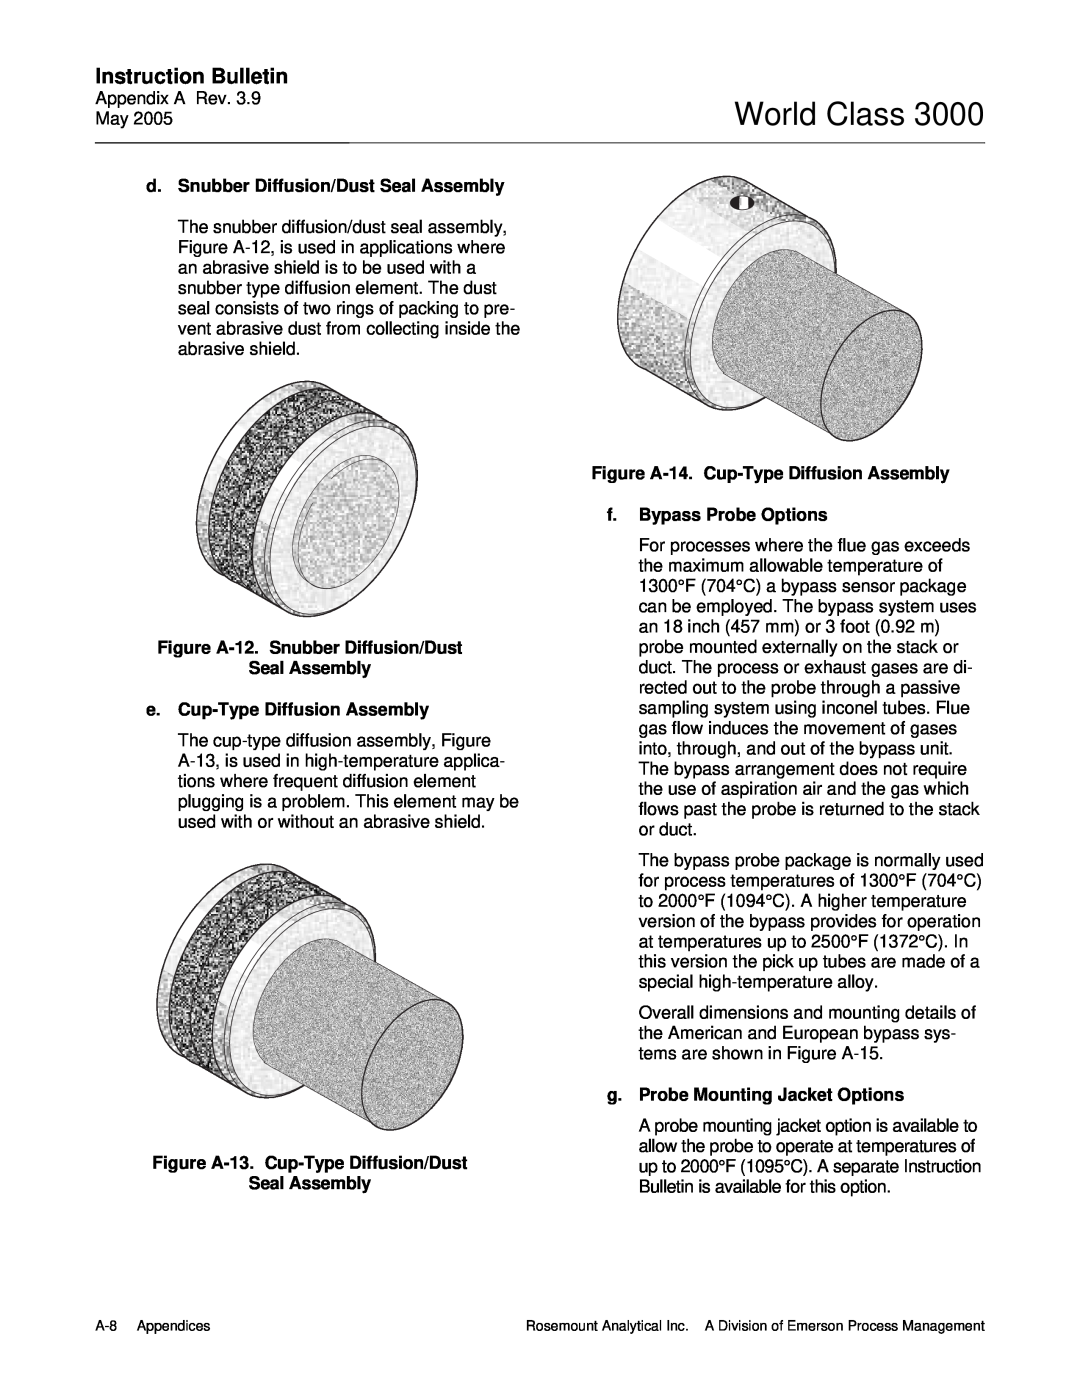 Emerson 3000 World Class, Instruction Bulletin, d.Snubber Diffusion/Dust Seal Assembly, e.Cup-TypeDiffusion Assembly 